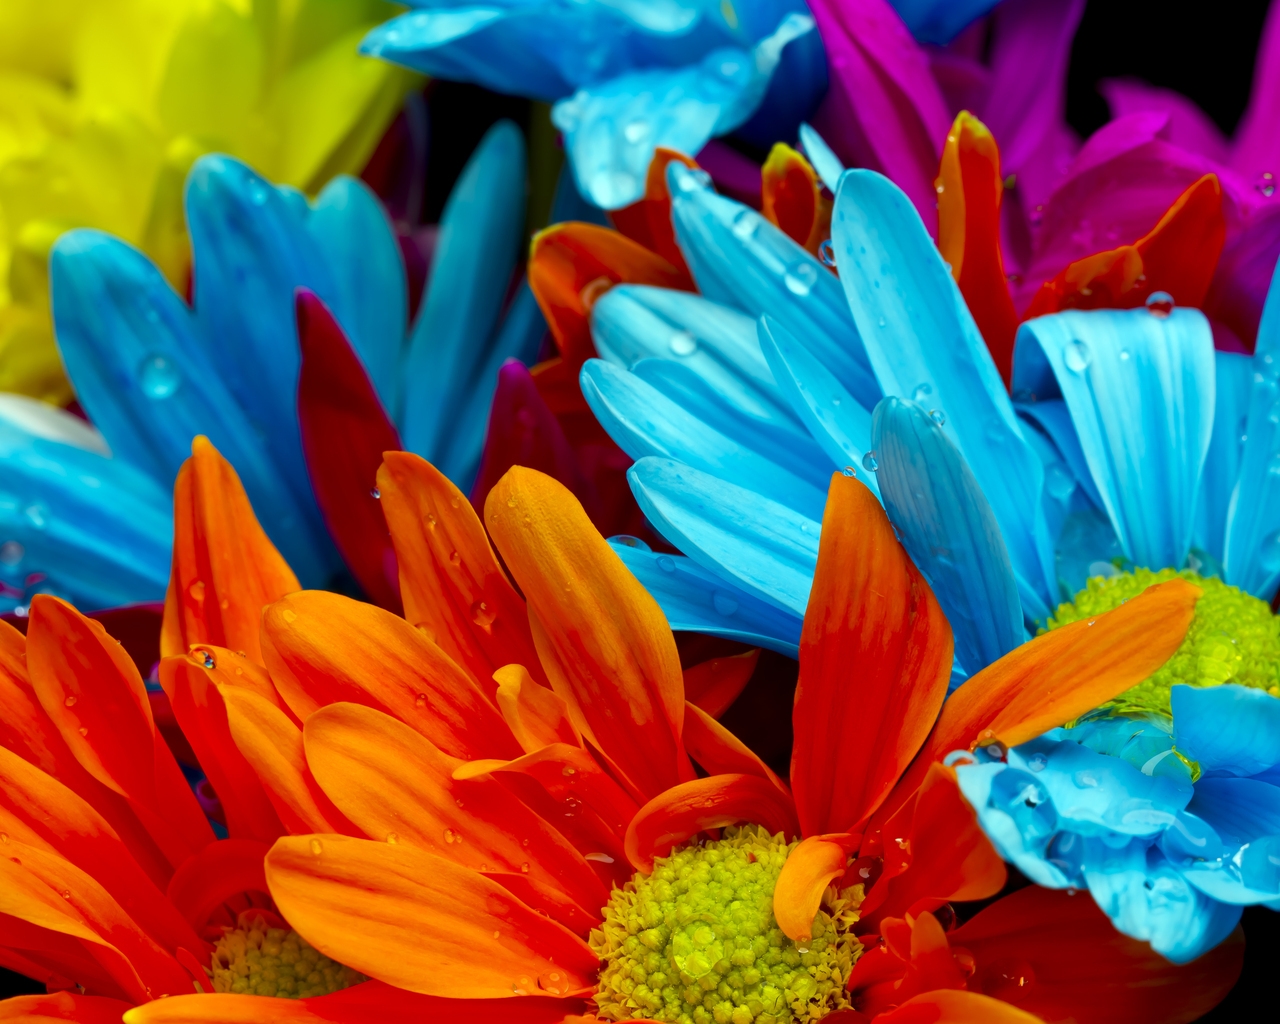 Amazing Flower Colors for 1280 x 1024 resolution